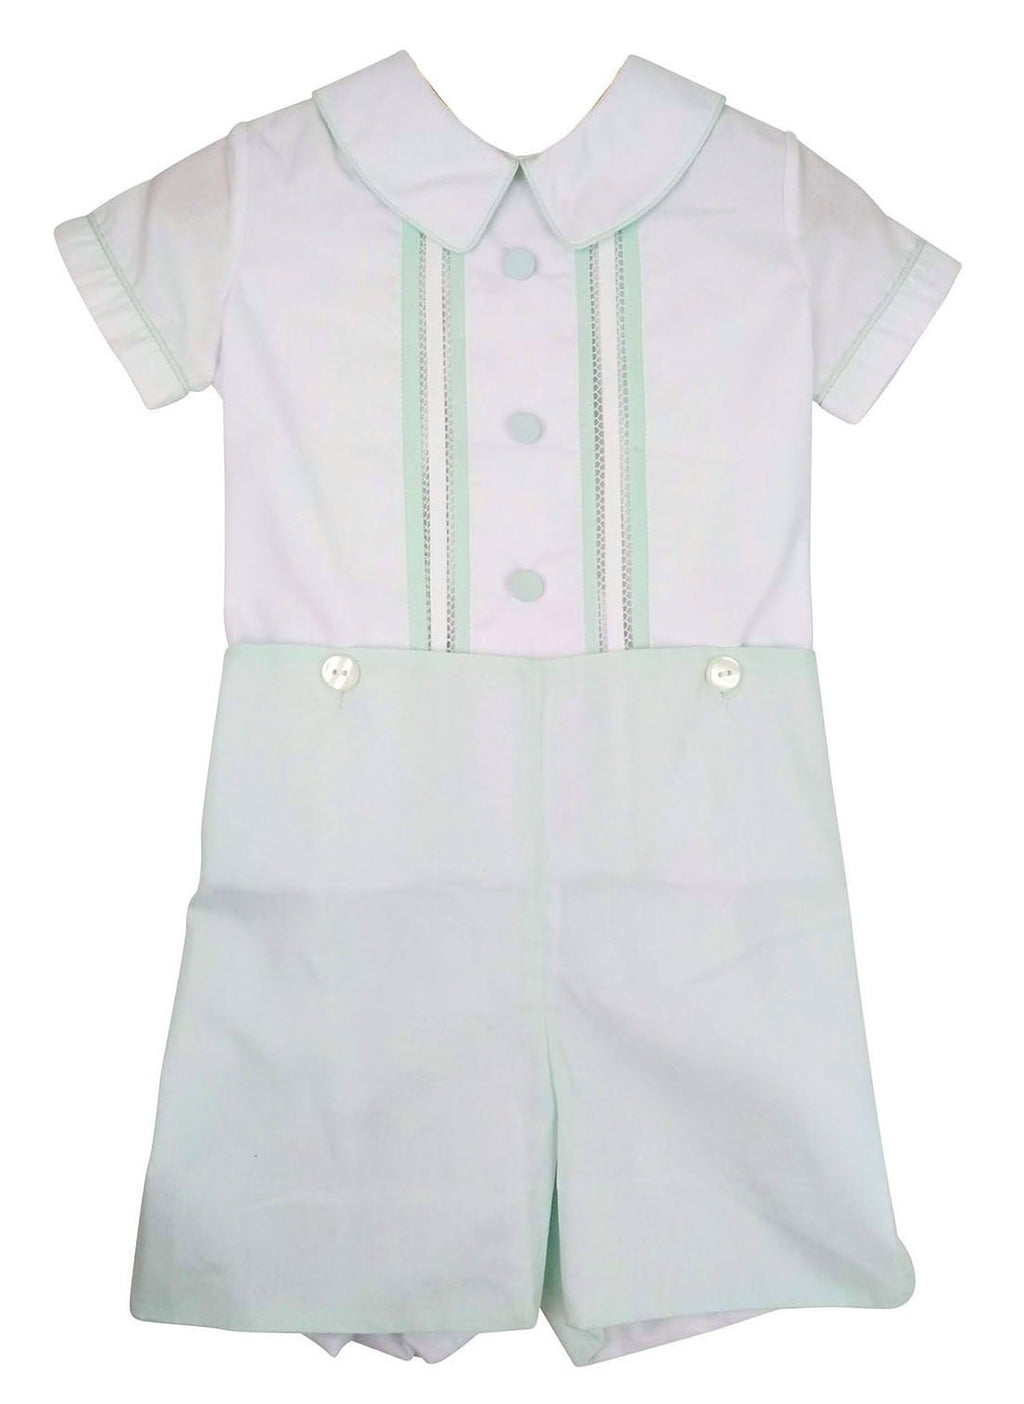 Mint button on fagotting stitched shirt - Little Threads Inc. Children's Clothing